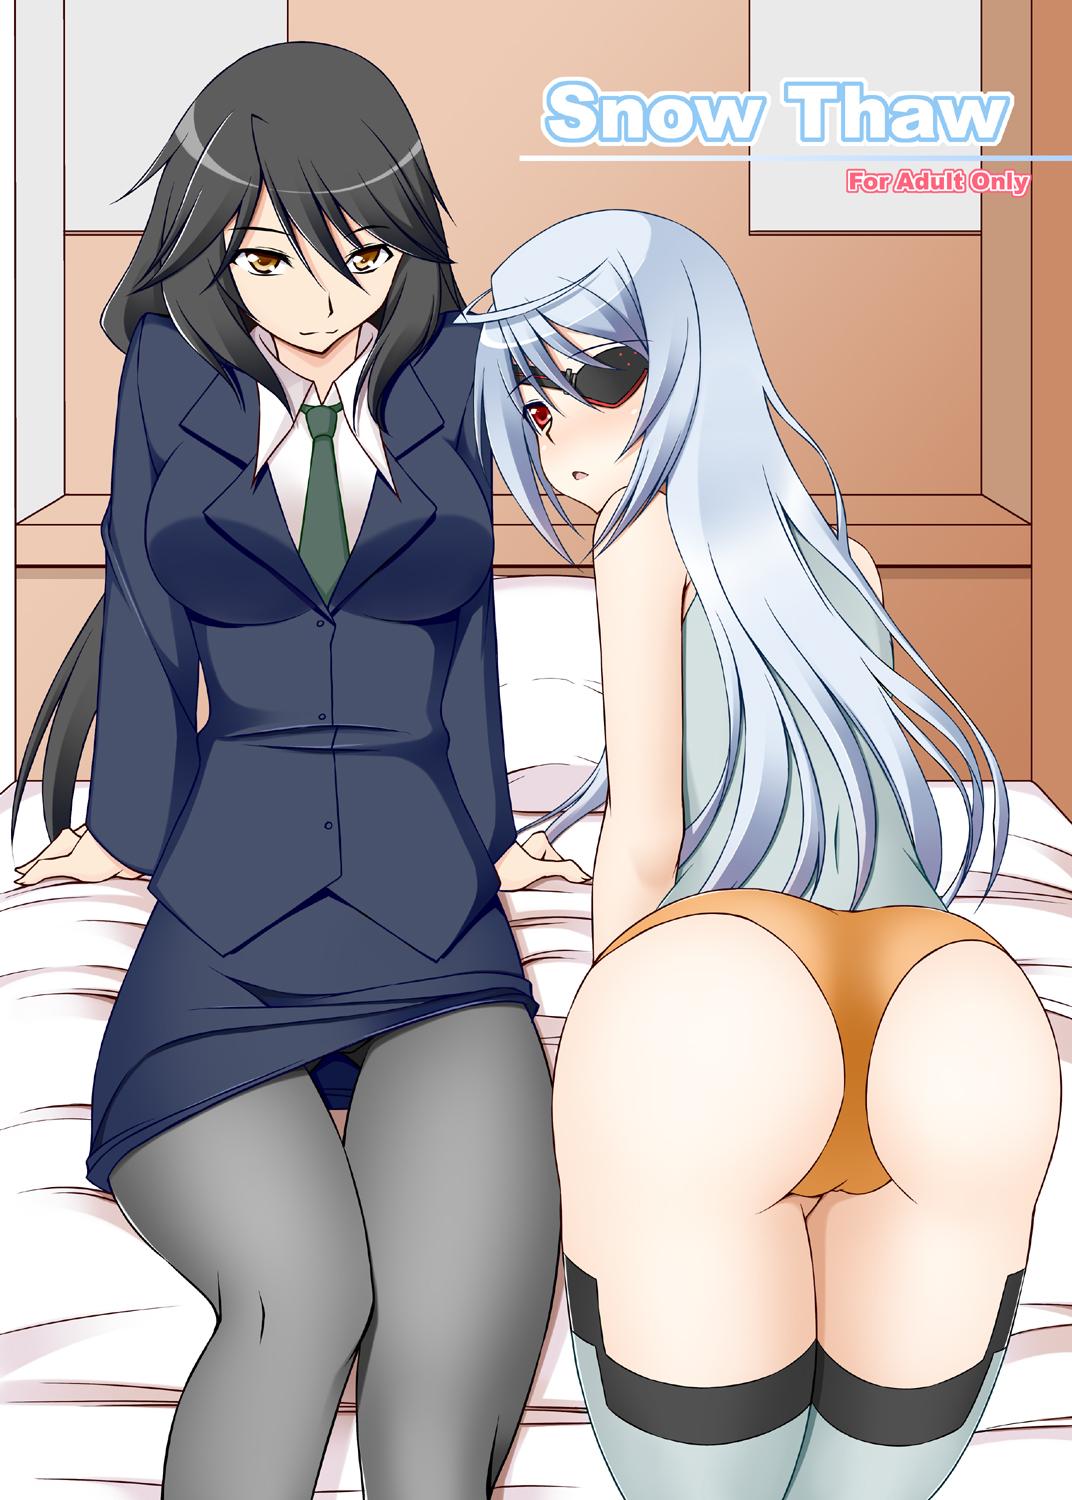 Bang Bros Snow Thaw - Infinite stratos Africa - Picture 1